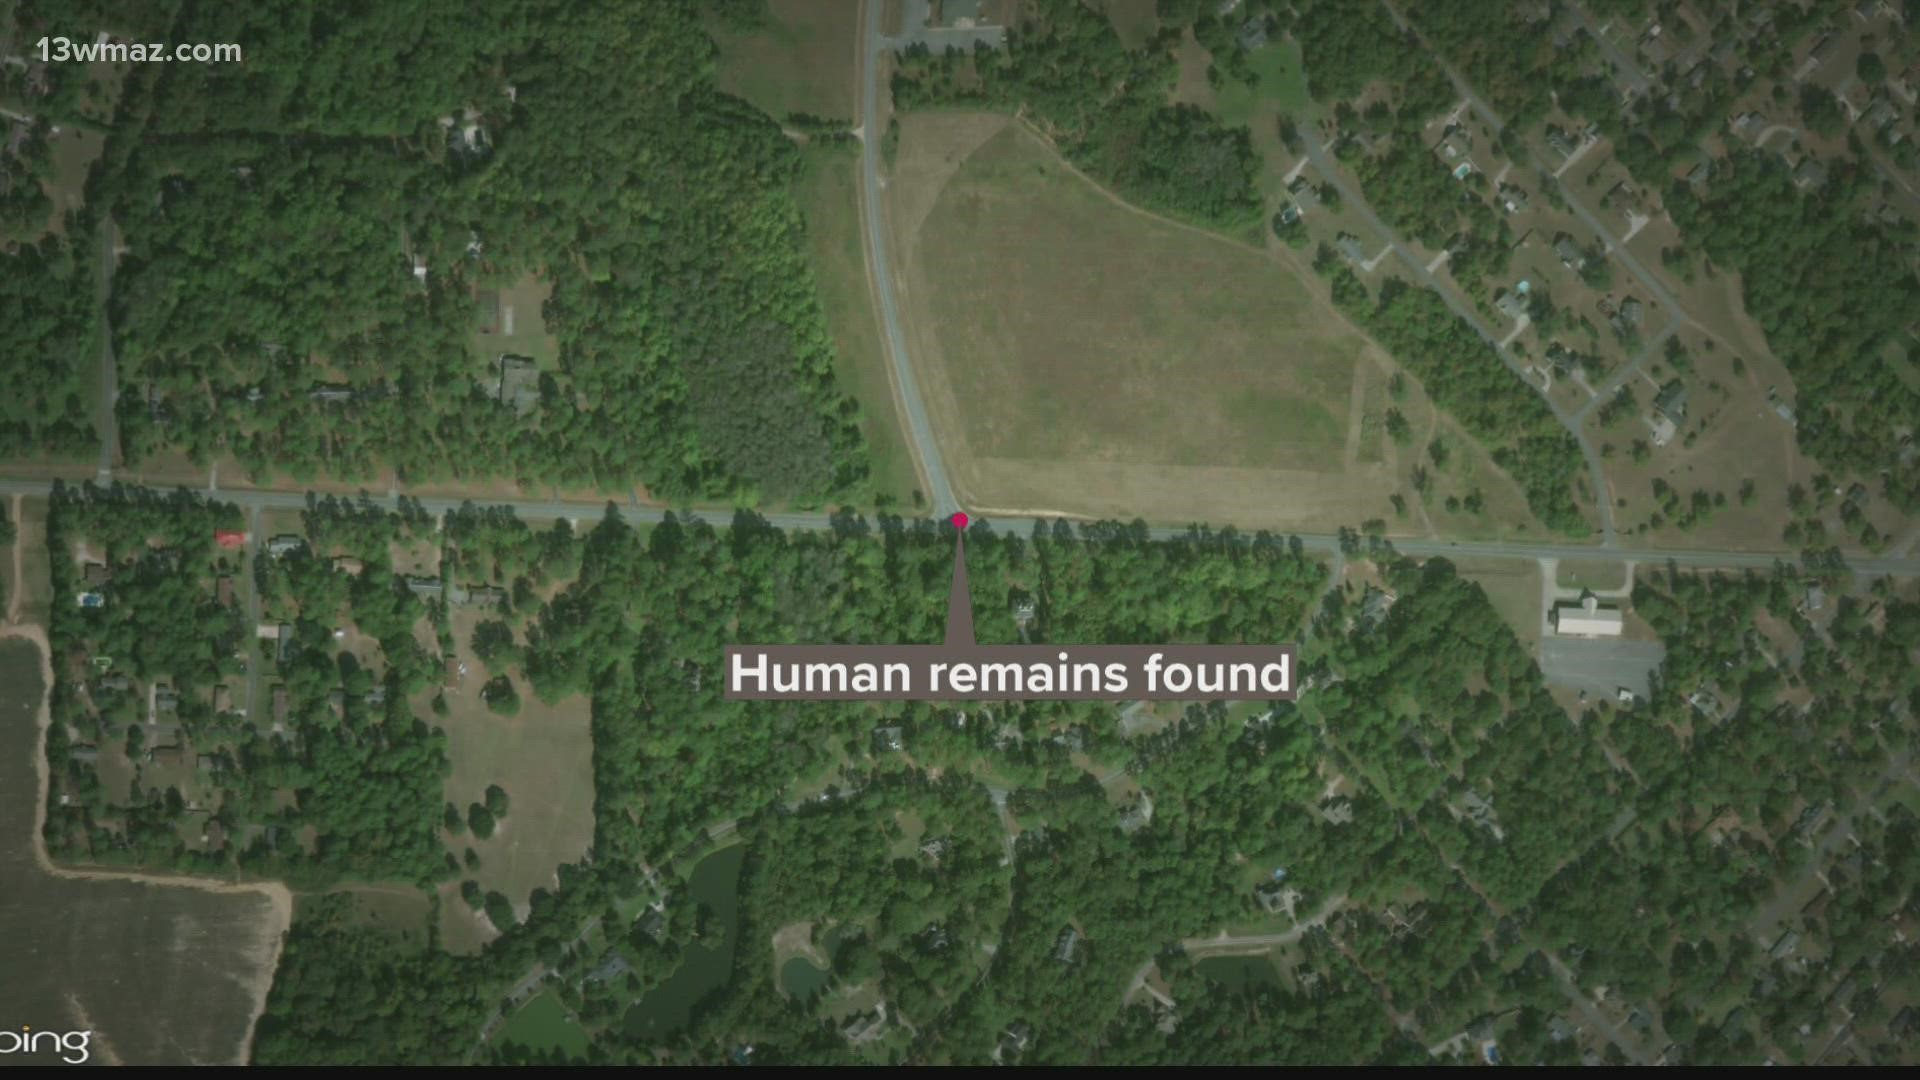 Human skeletal remains have been found at the intersection of Hawkinsville Highway and Pearl Bates Avenue in Dodge County